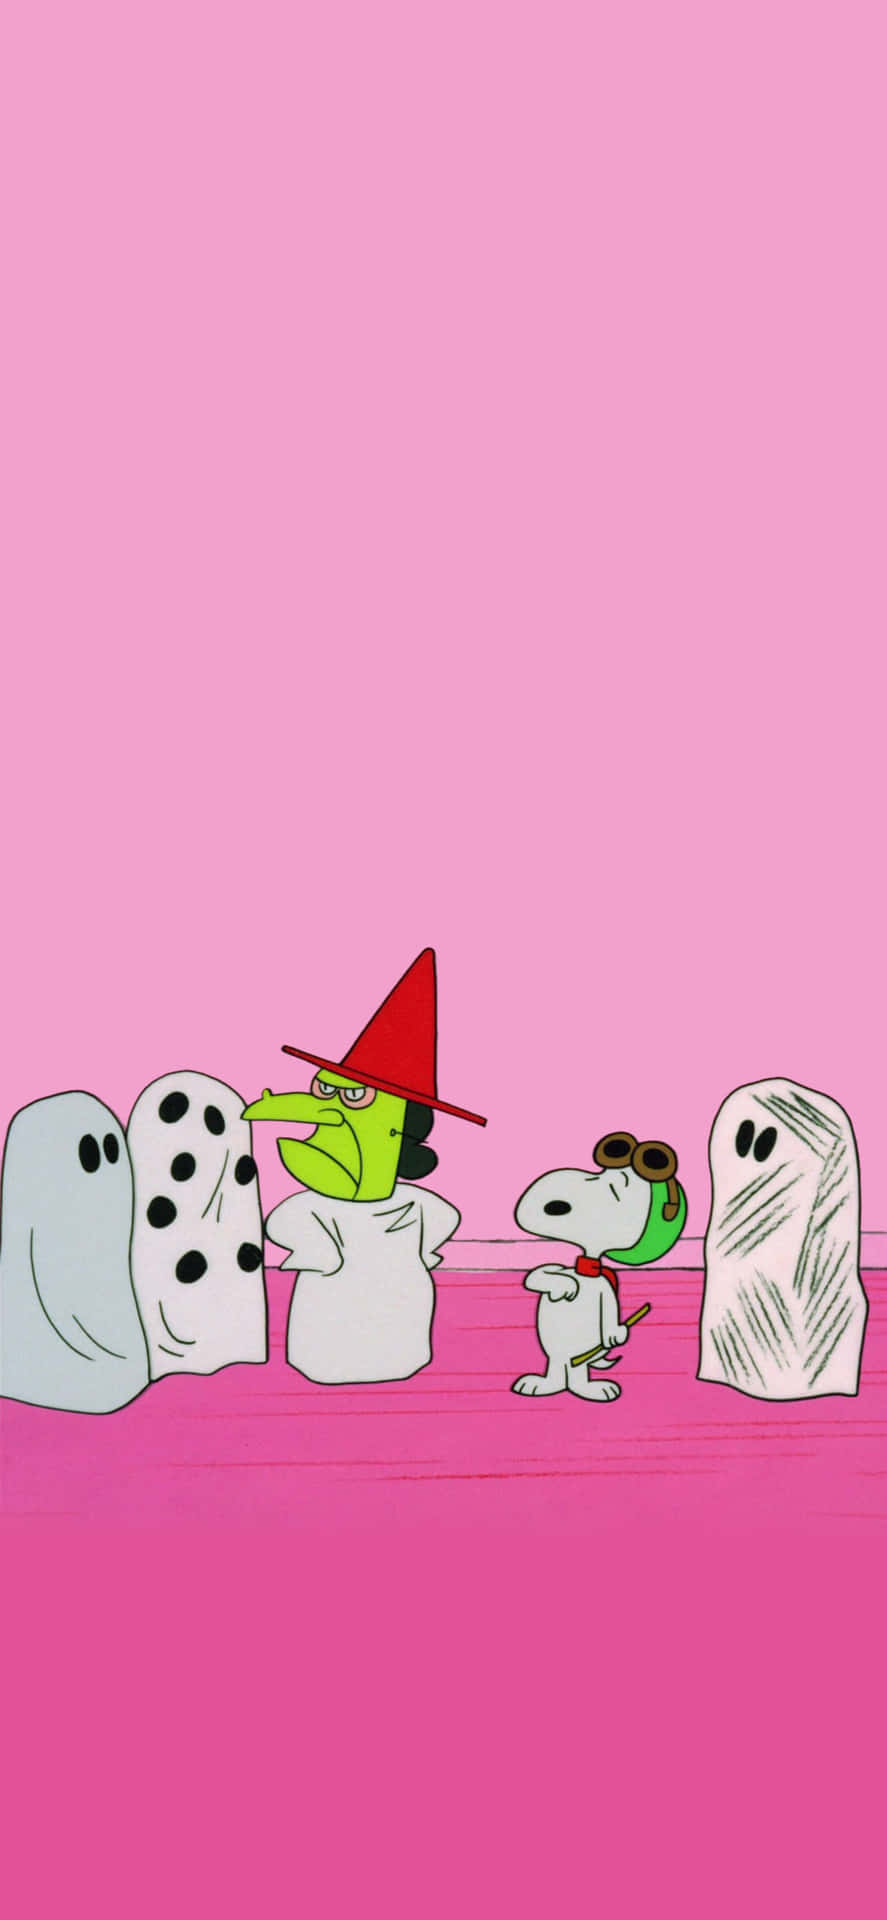 Download A Group Of Cartoon Characters Dressed In Halloween Costumes ...